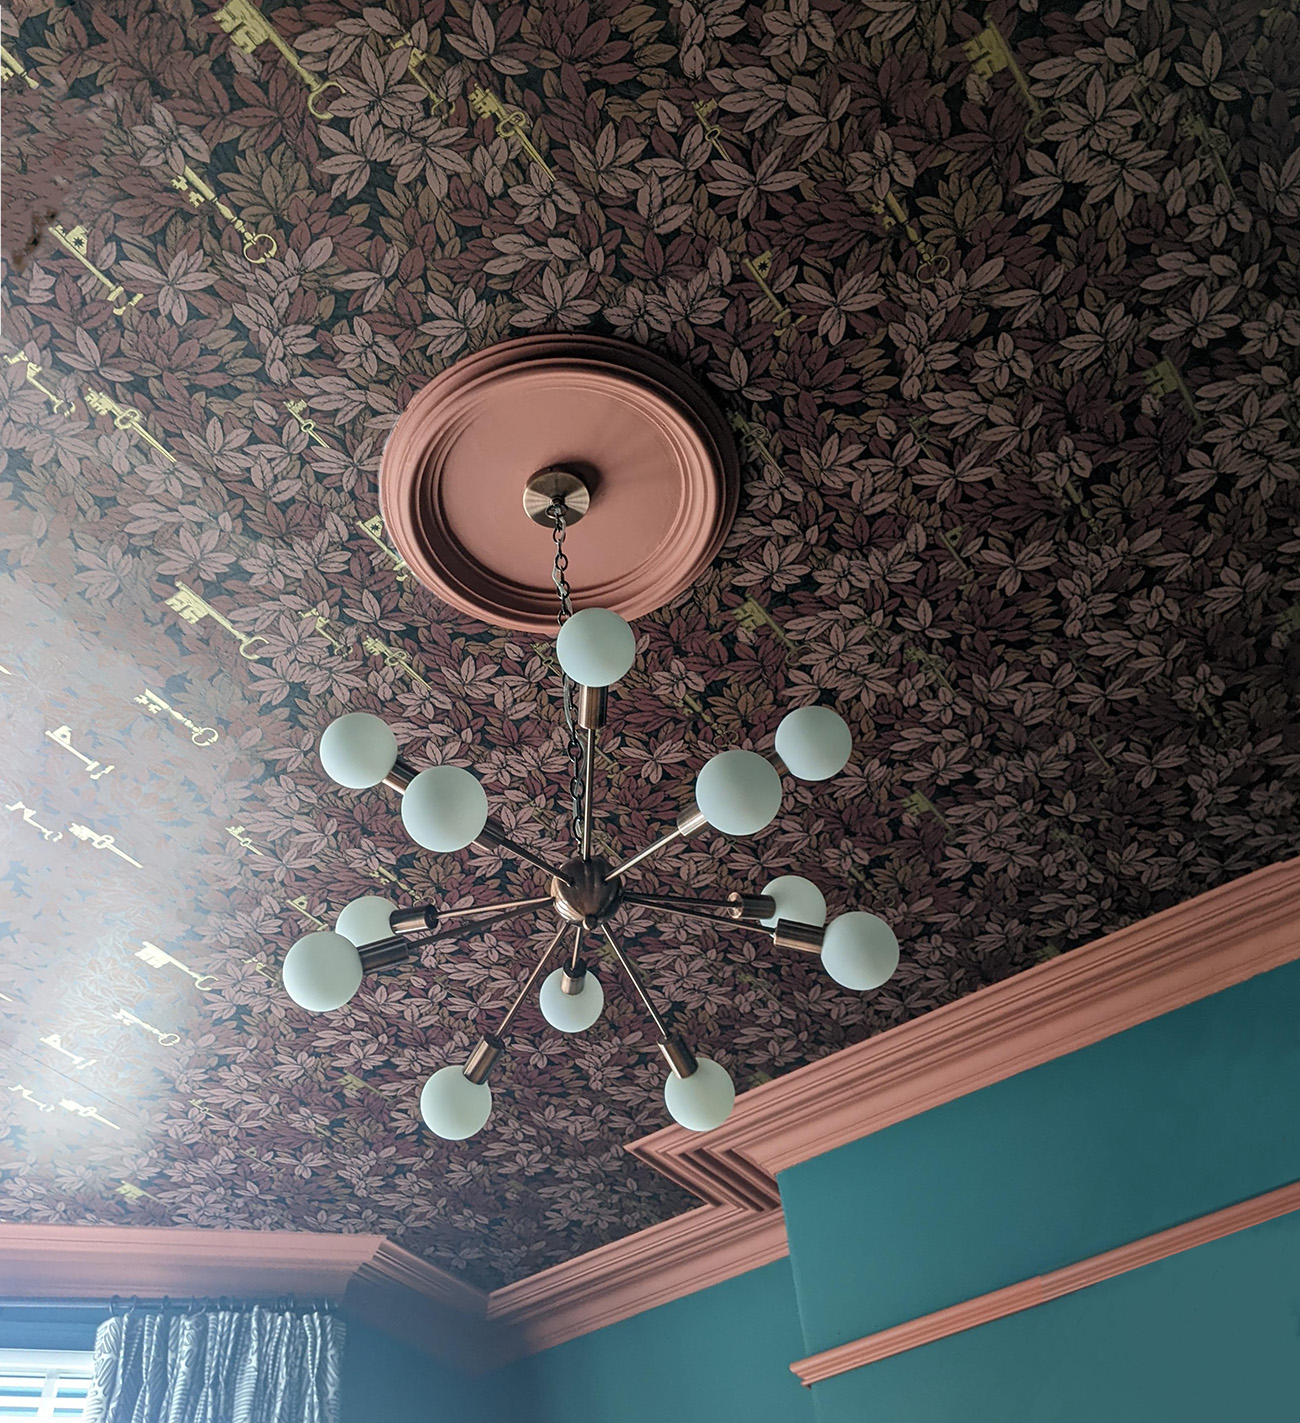 A photo showing the ceiling light after the room has been decorated.